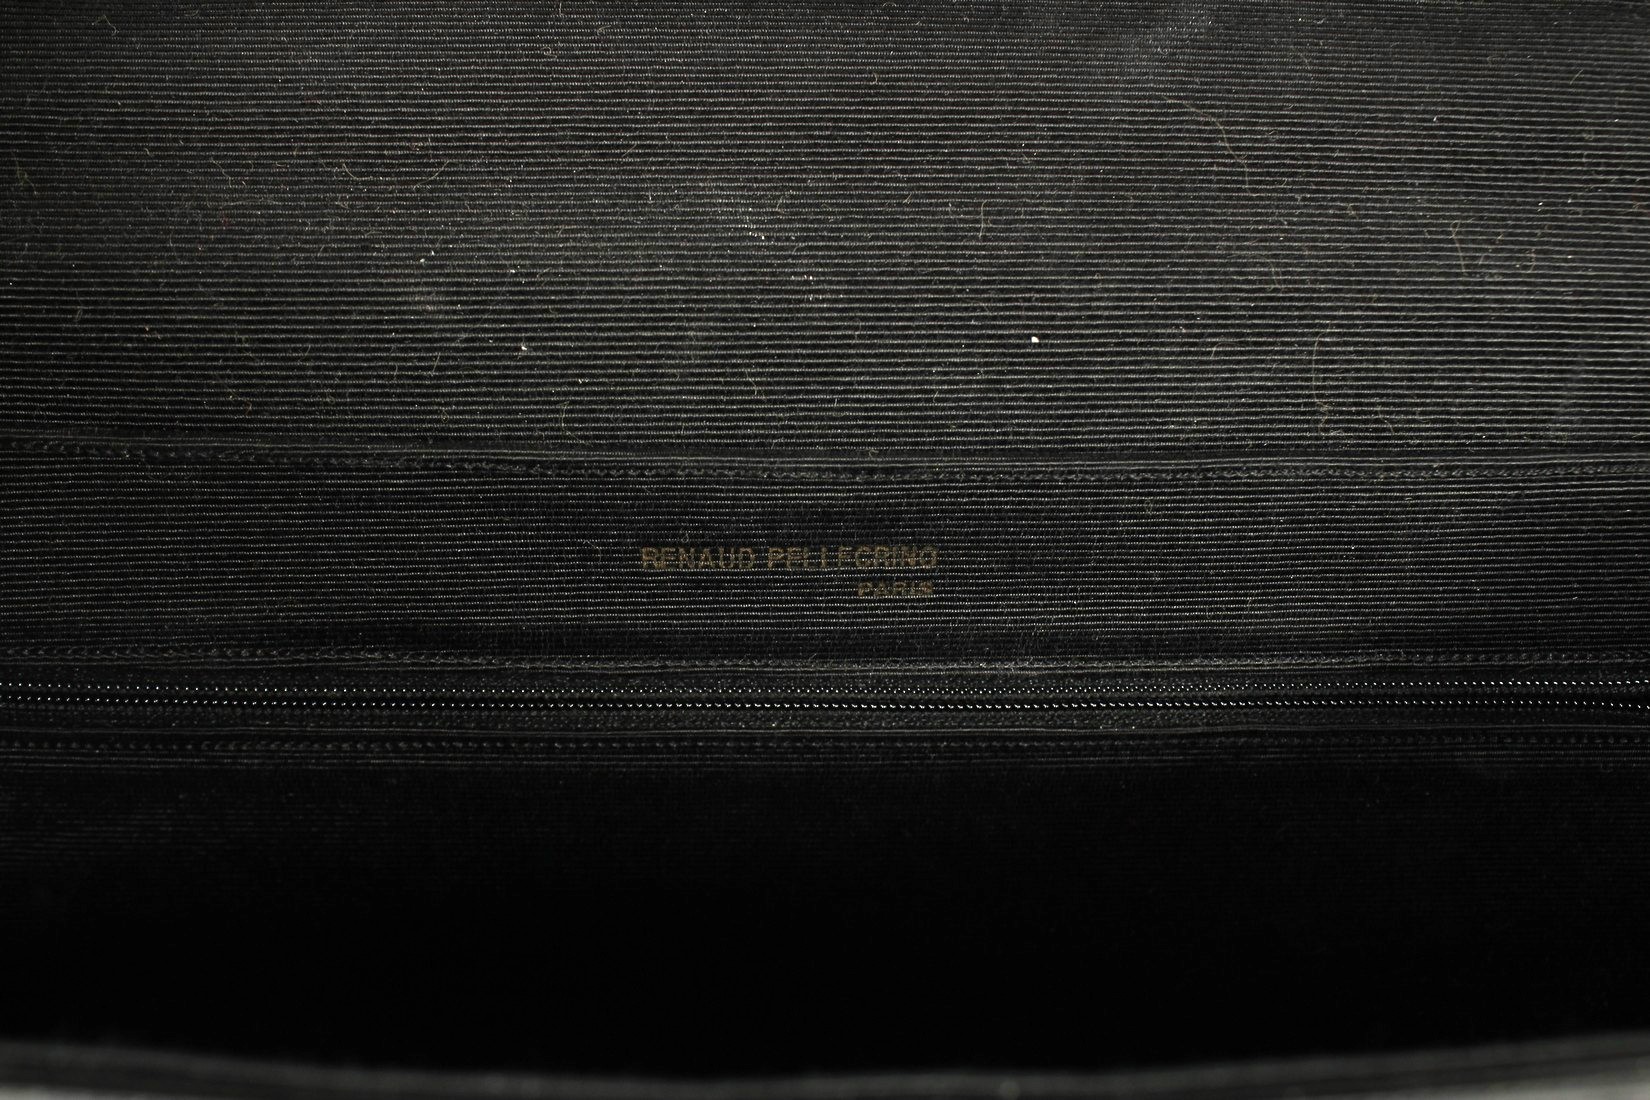 A RENAUD PELLEGRINO, PARIS, BLACK LEATHER BAG with shaped cloth front. 32cms long x 20cms deep. - Image 6 of 6